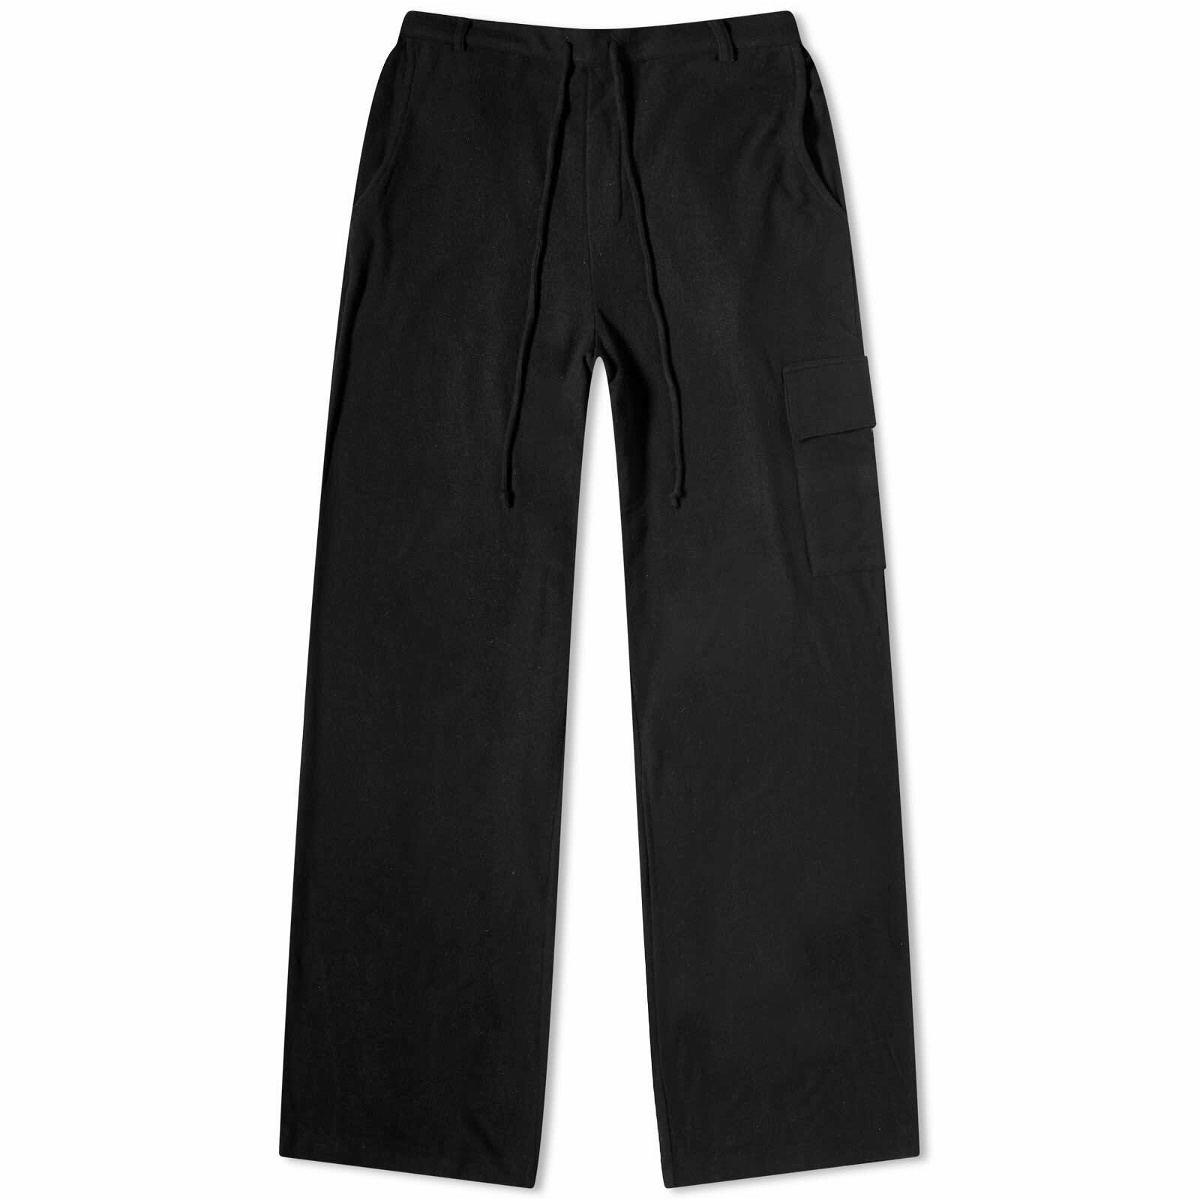 DONNI. Women's Sweater Cargo Pants in Jet DONNI.